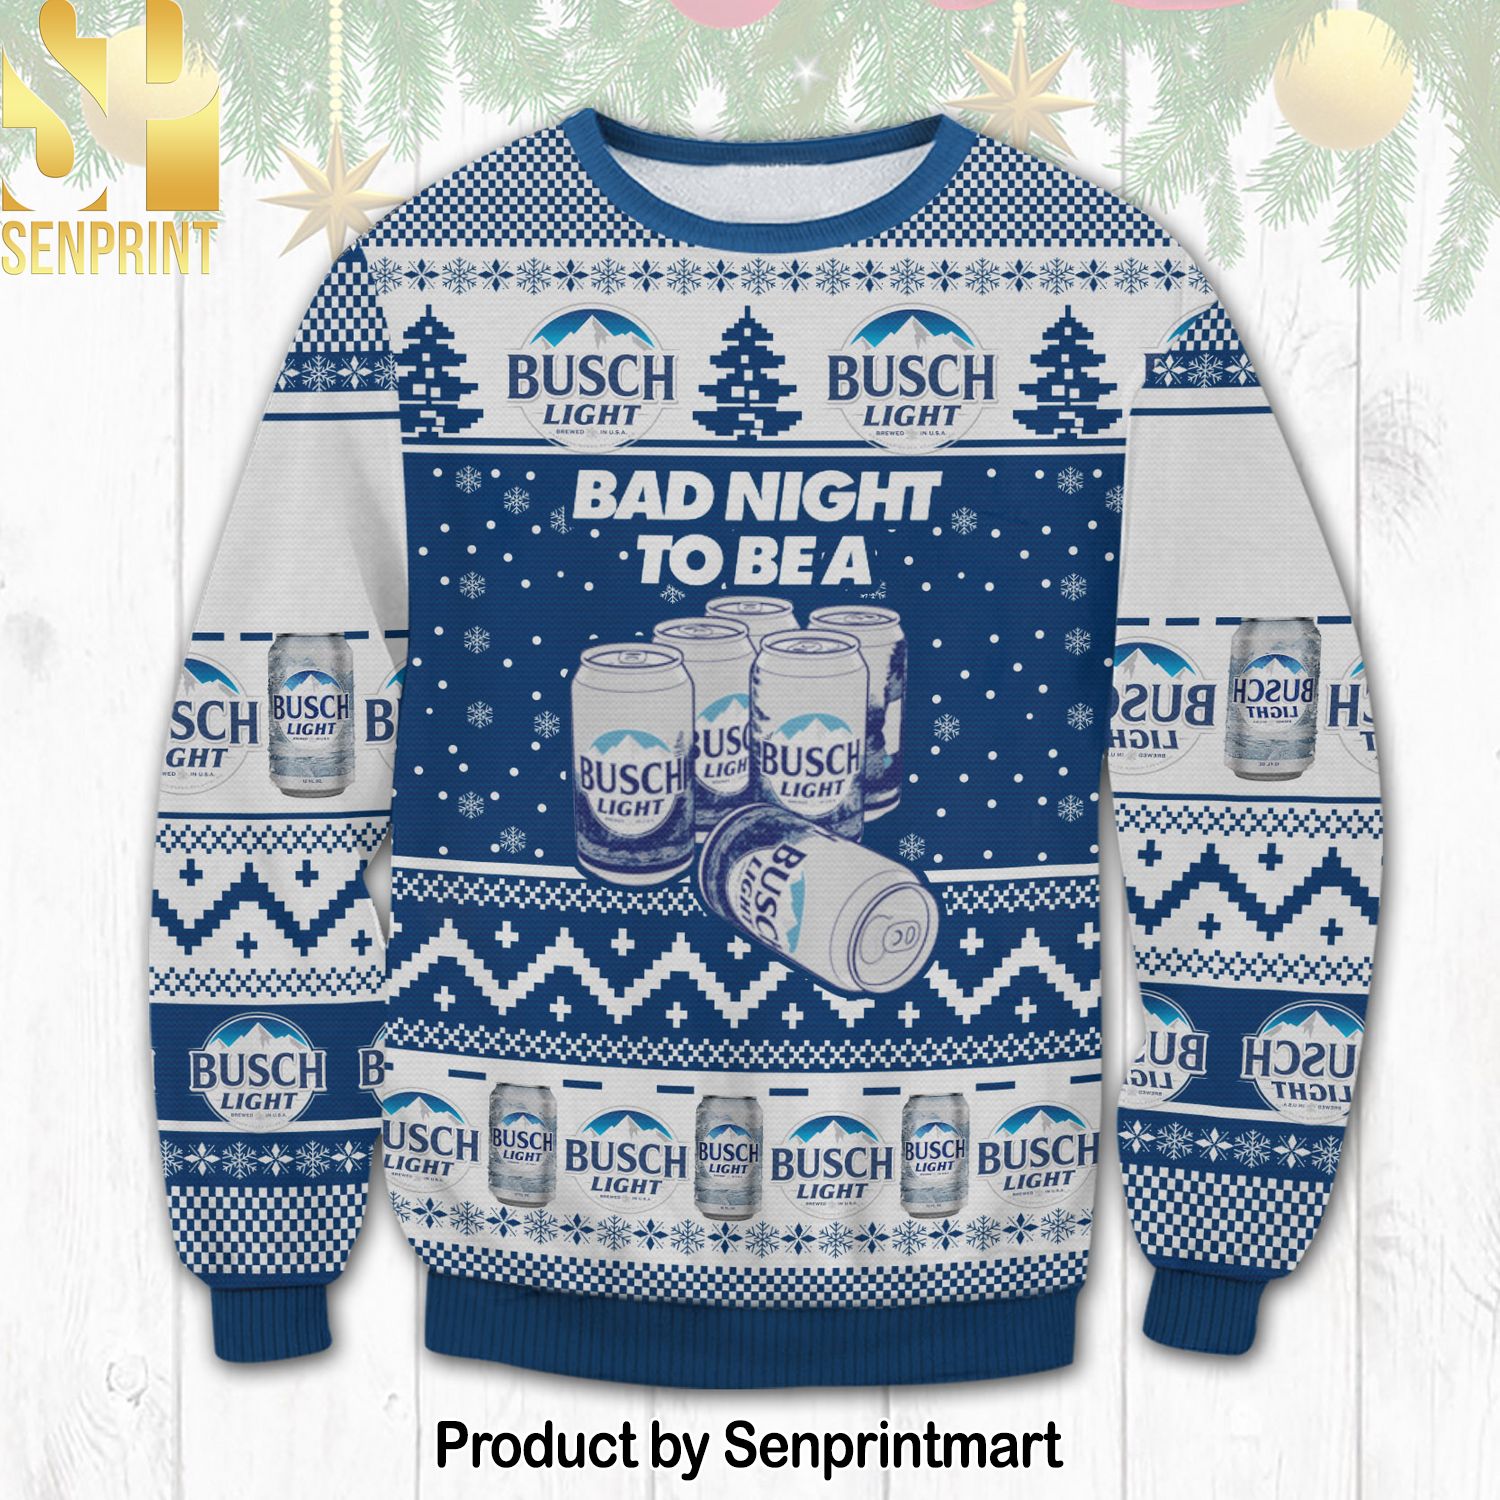 Busch Light Bad Night To Be A Busch Light 6 Pack Ugly Christmas Sweater